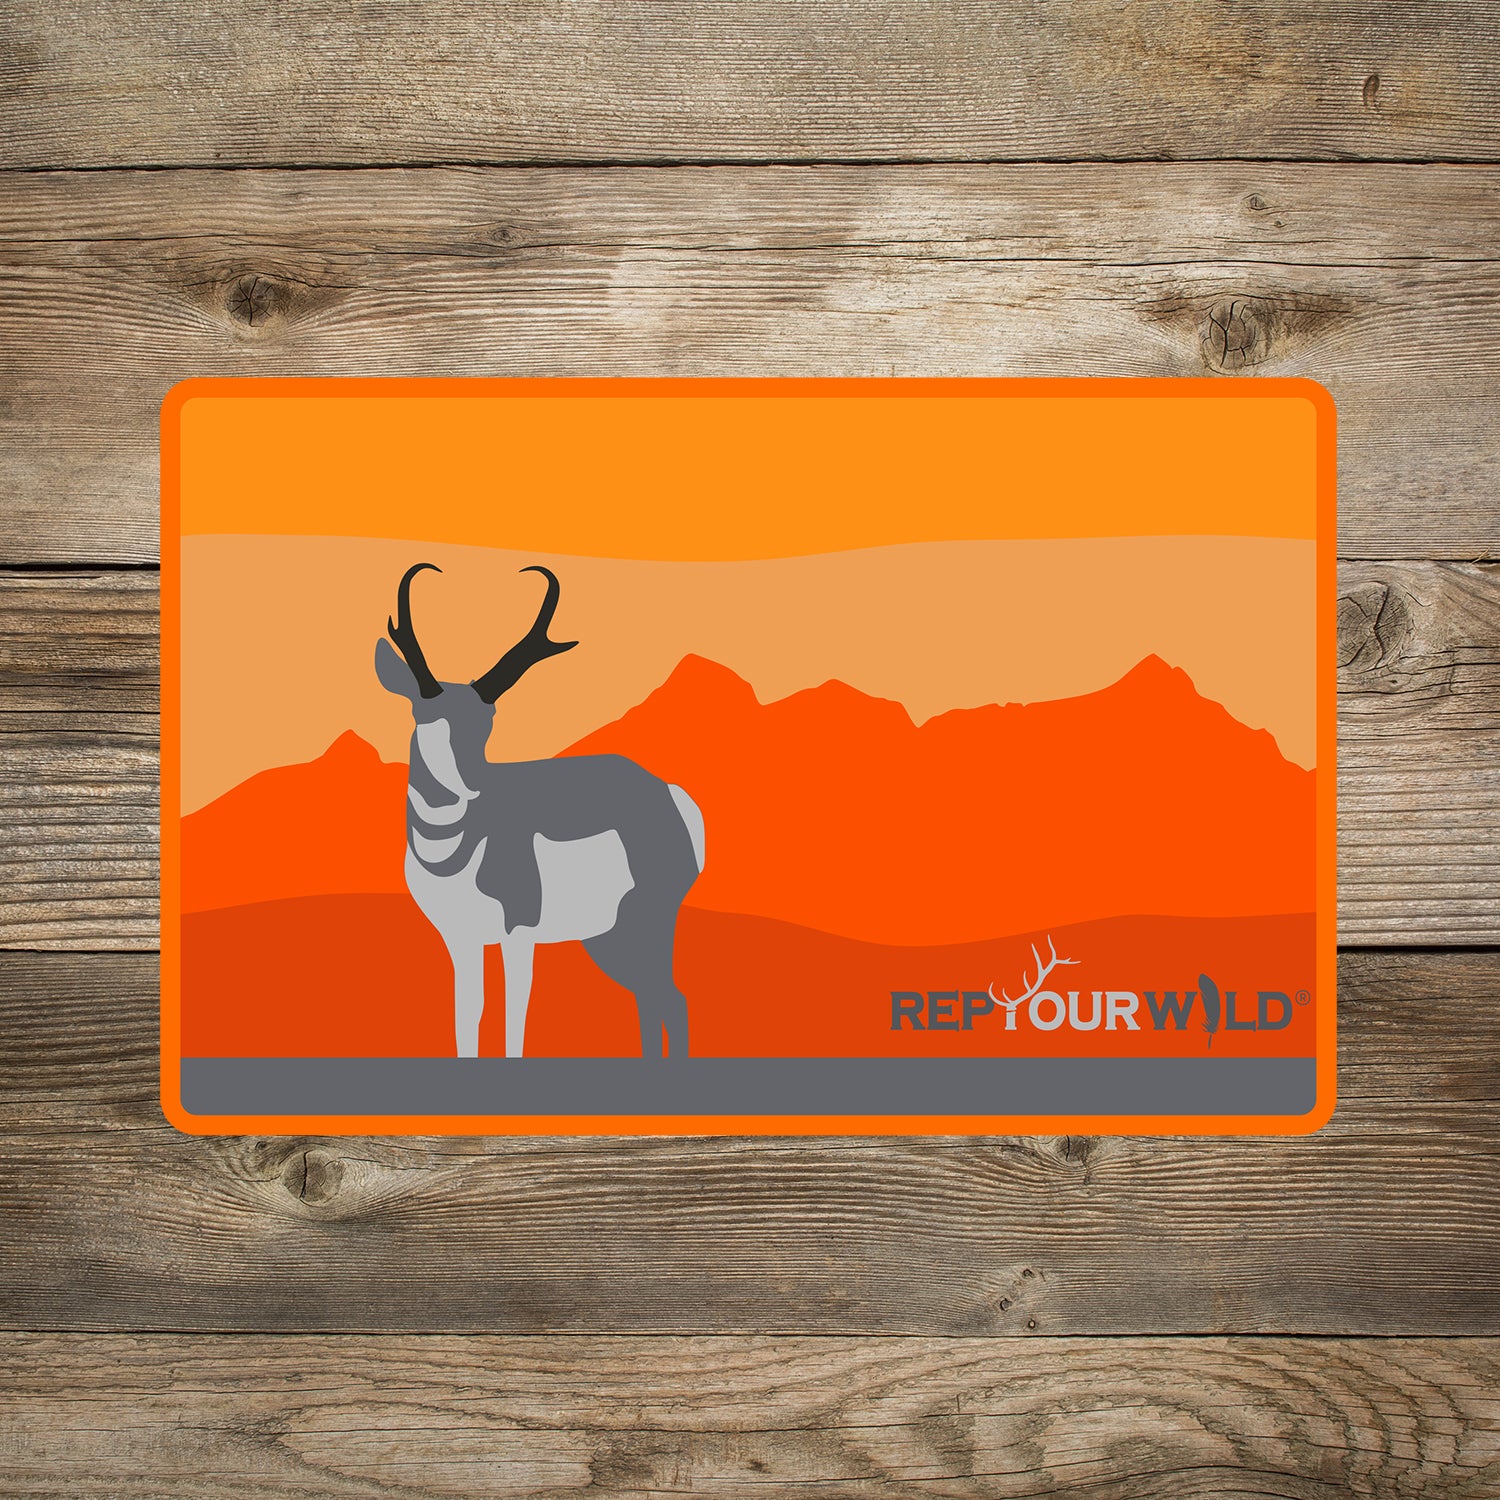 A sticker on wood background features an antelope in front of mountains in a rectangular shape